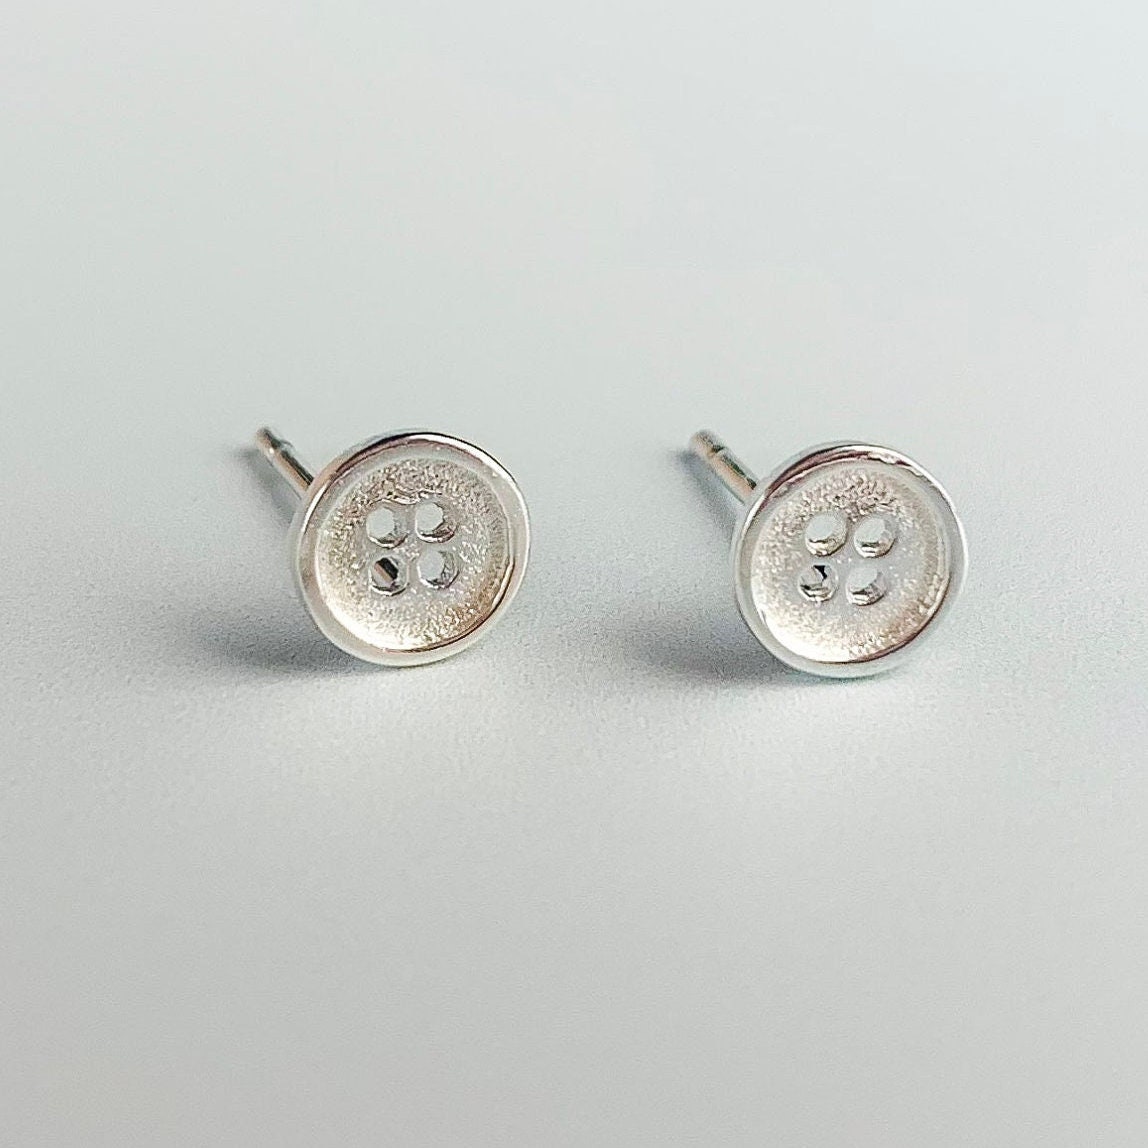 Polished Rose Finish Silver Ball Stud Earrings 9 mm